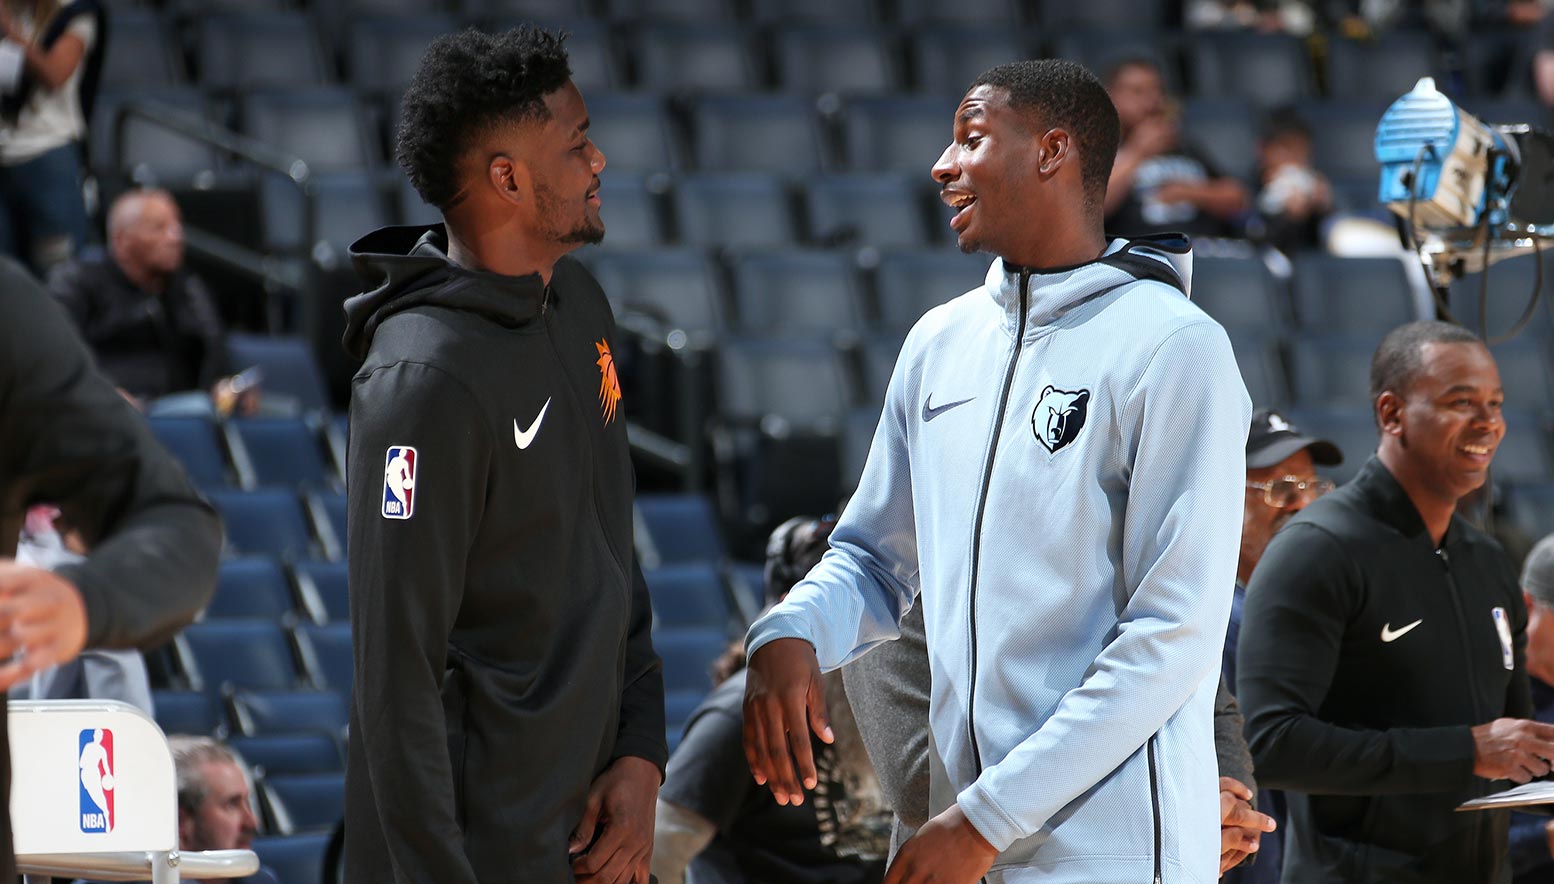 Deandre Ayton #22 of the Phoenix Suns and Jaren Jackson Jr. #13 of the Memphis Grizzlies talk before the game